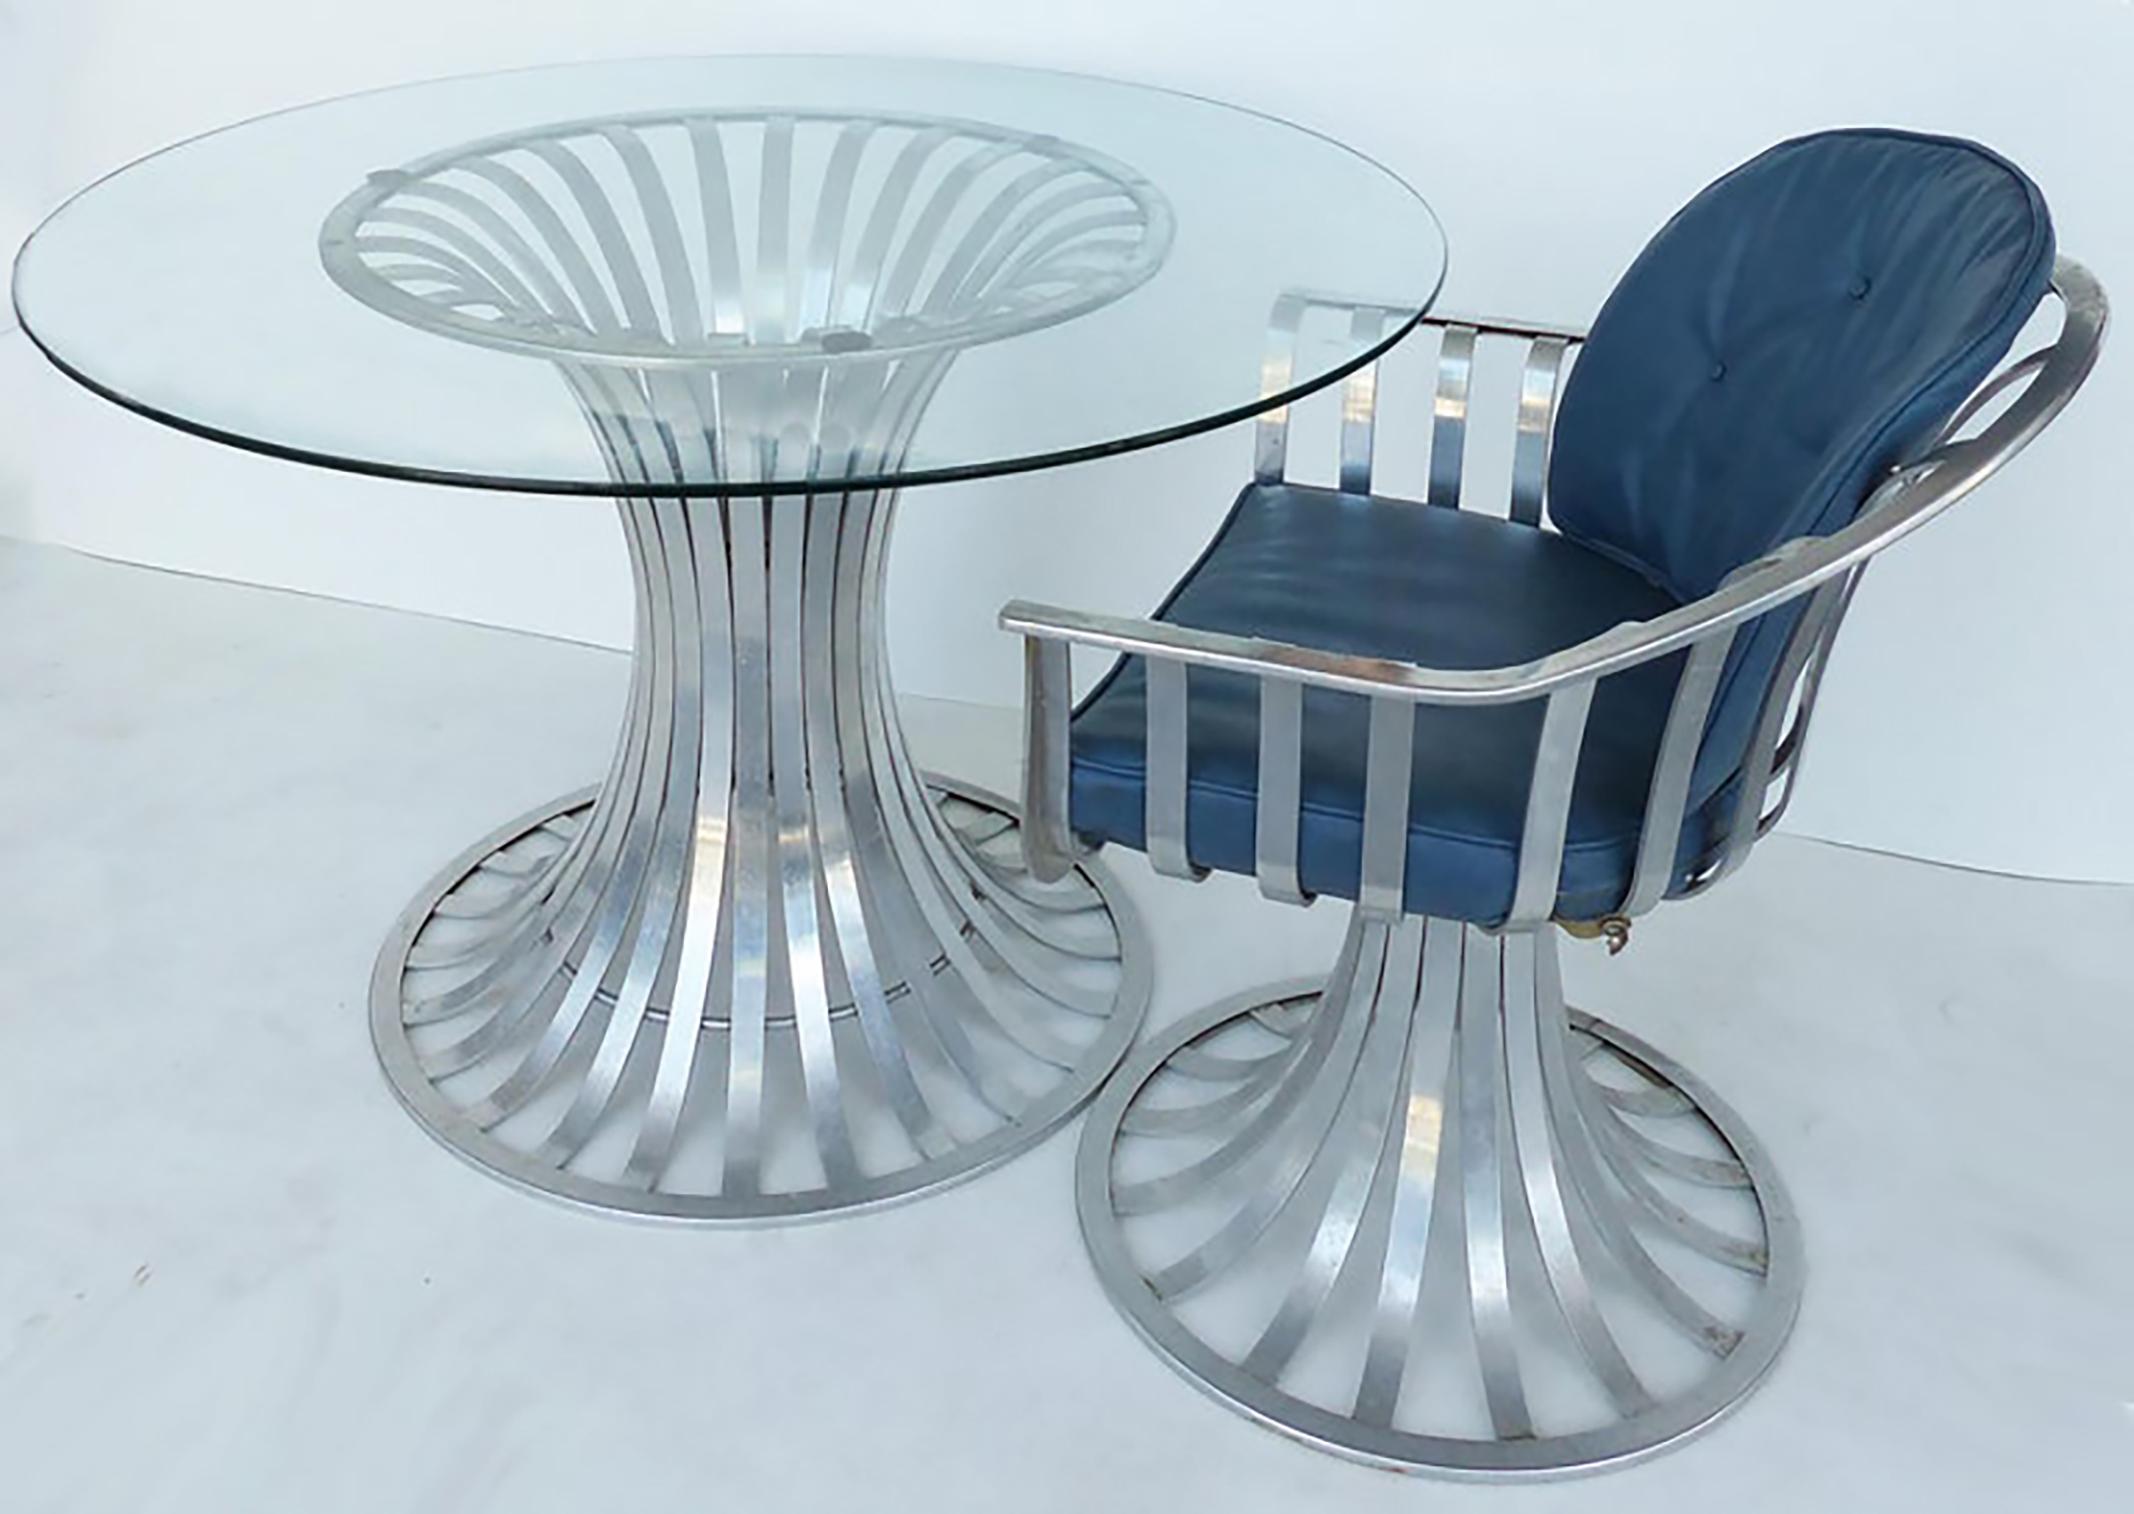 Russell Woodard aluminum mid-century table 4 chairs and cushions

Offered for sale is an iconic Russell Woodard mid-century aluminum table with a glass top and 4 matching chairs. The chairs are complete with their fitted cushions.

Table: Height